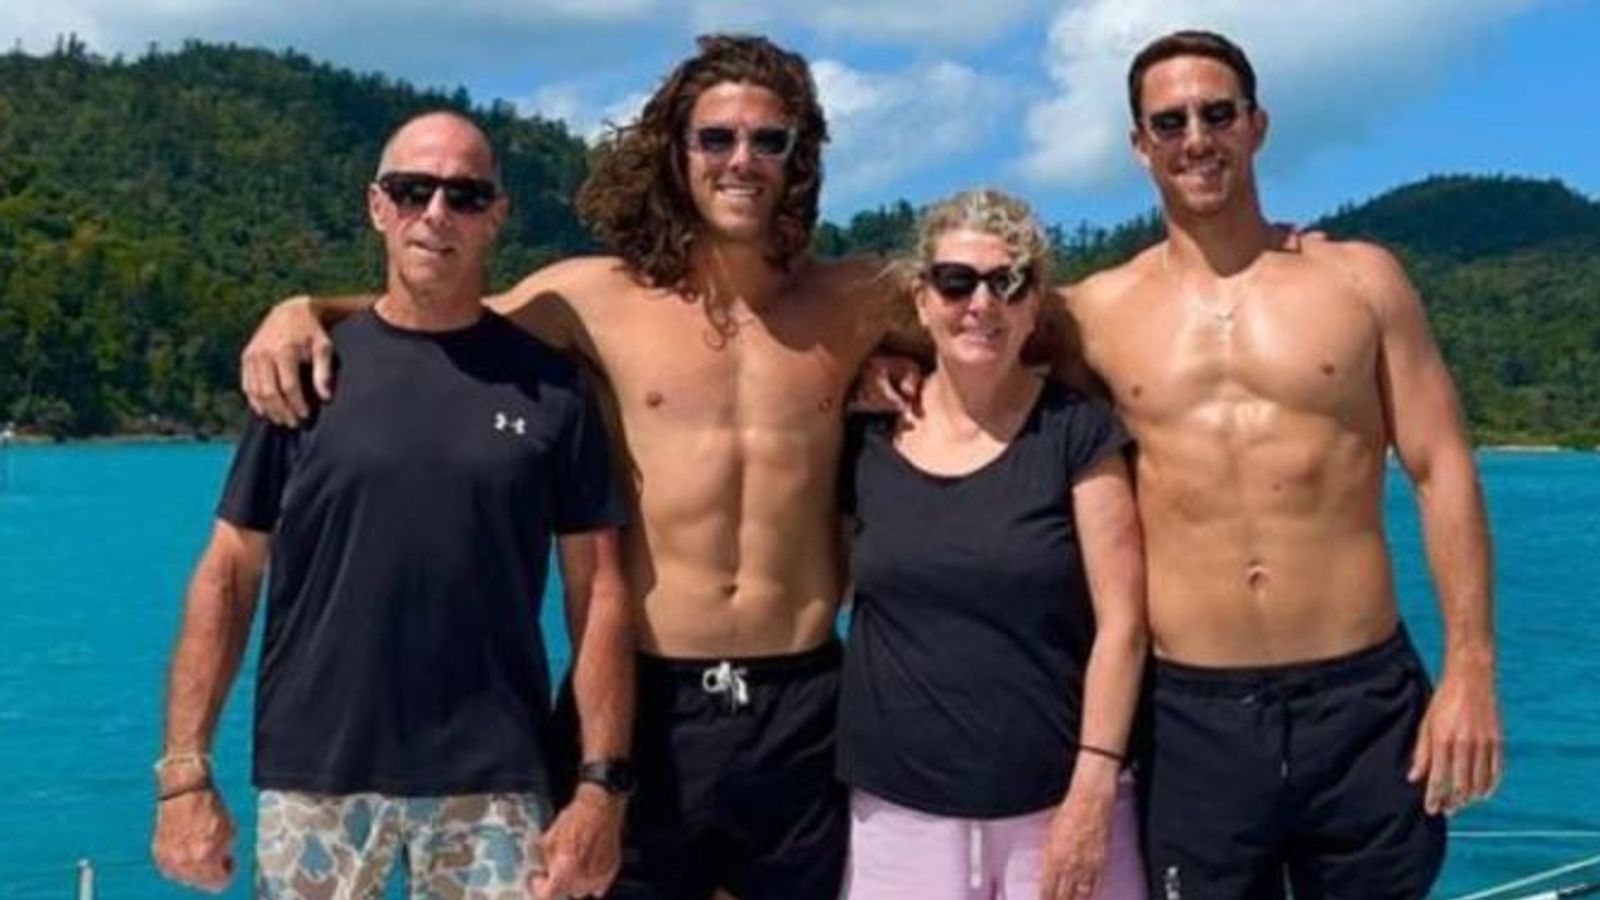 Australian brothers and US tourist who went missing on surfing trip in Mexico 'shot dead by thieves'